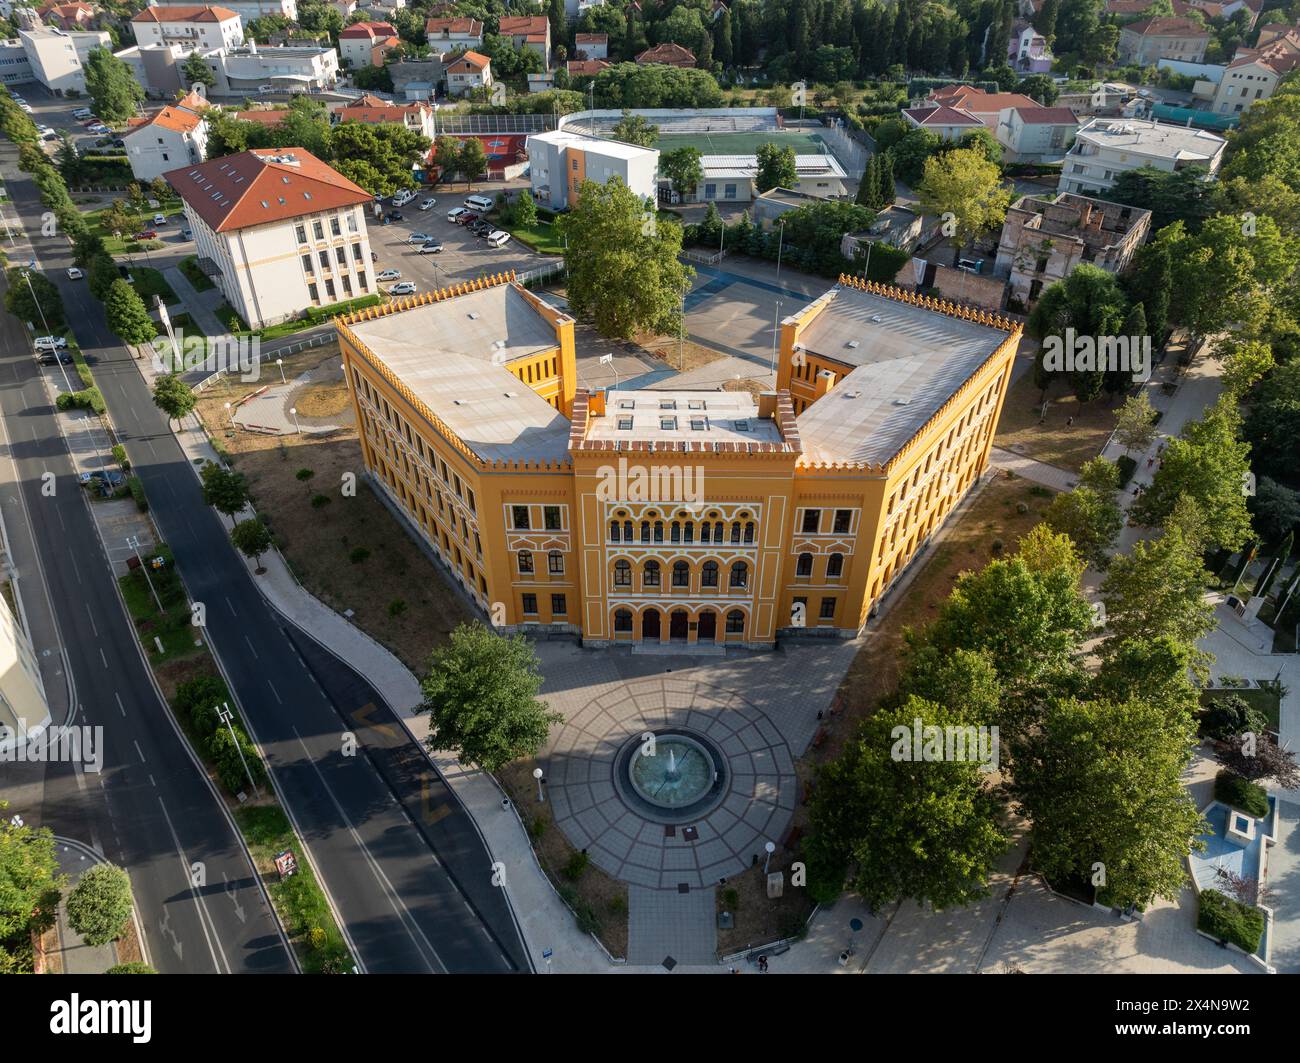 The United World College and Gymnasium building in Mostar, Bosnia and Herzegovina. Stock Photo